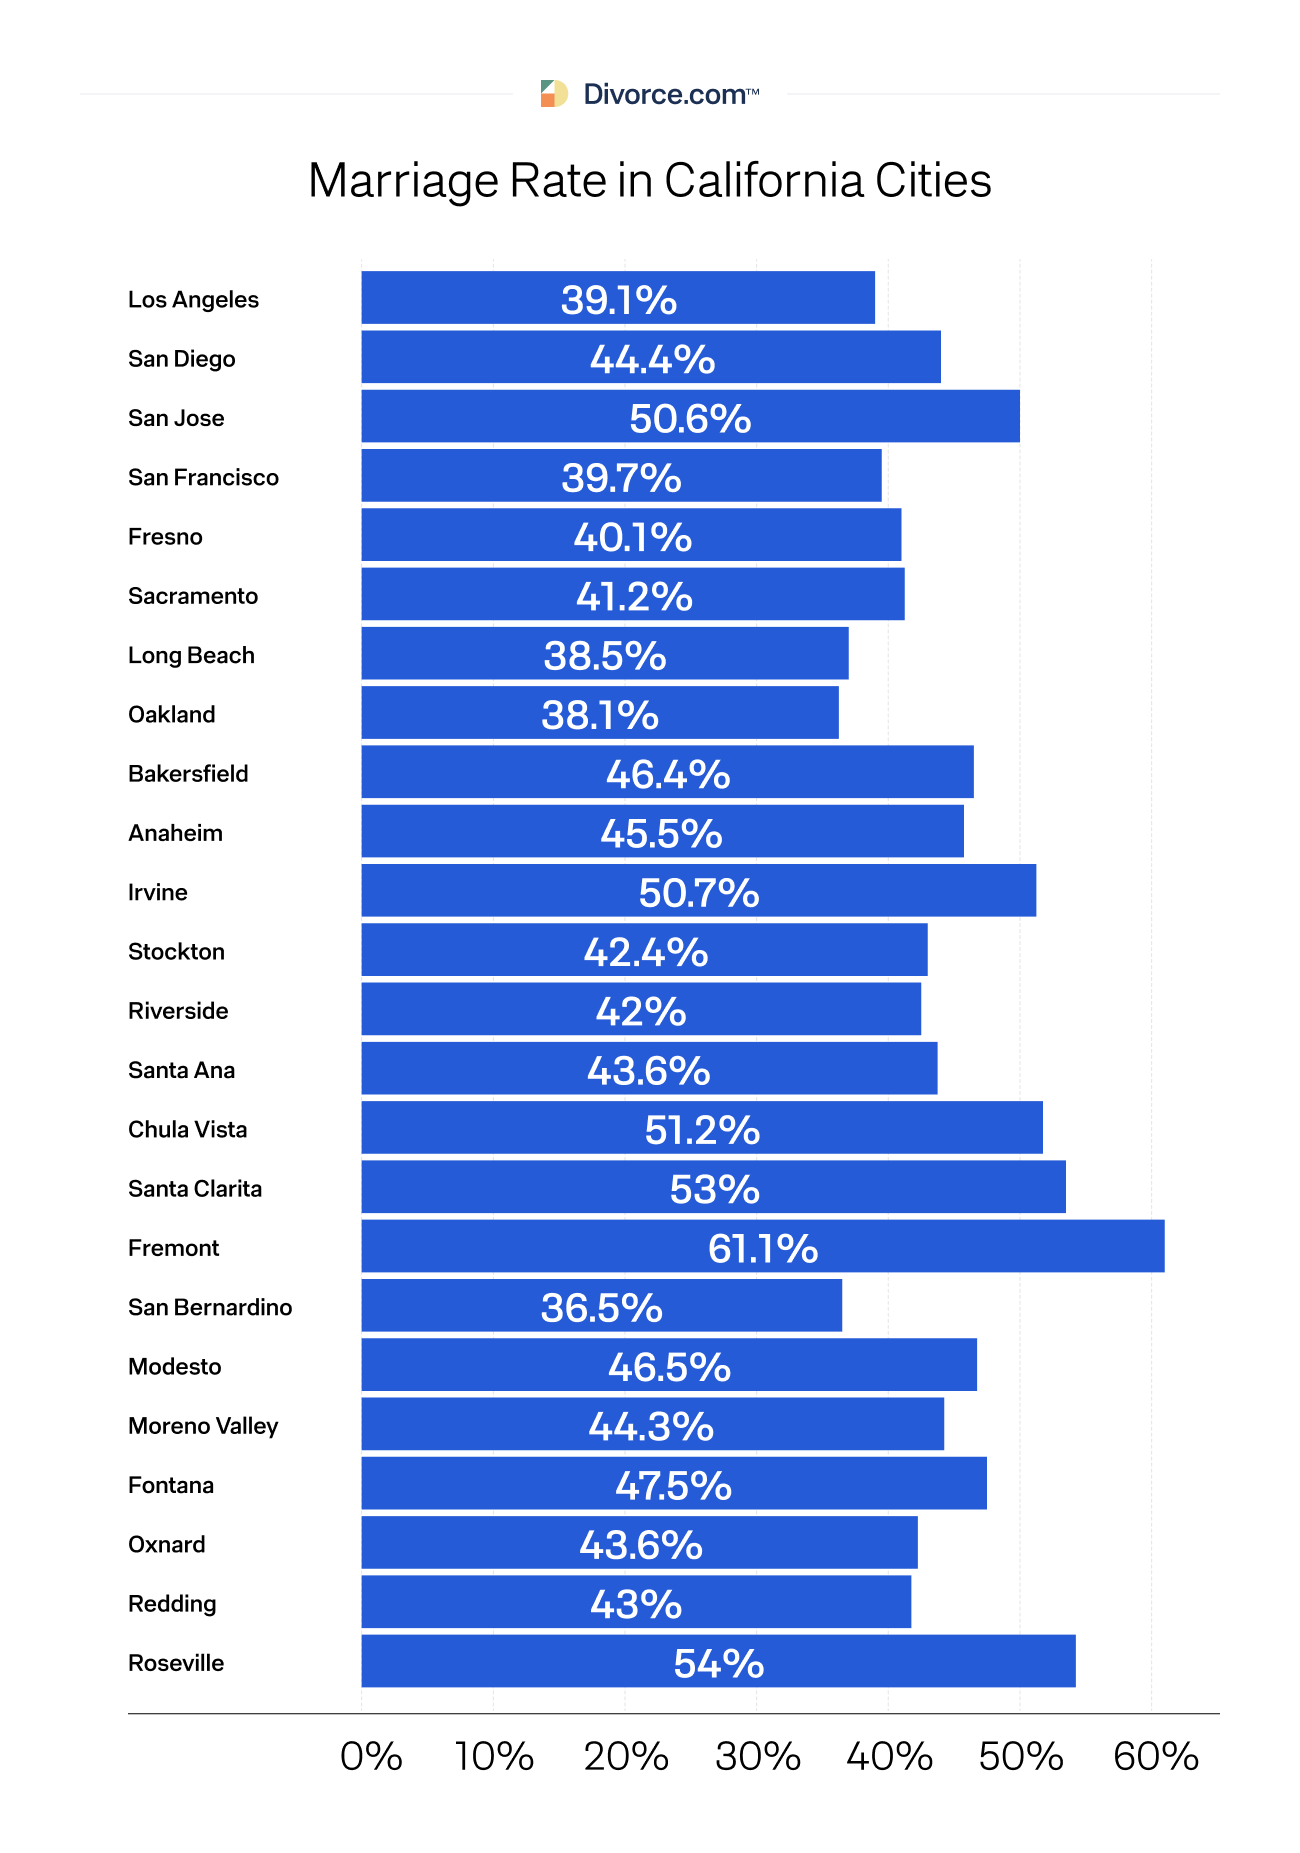 Marriage Rate in California Cities